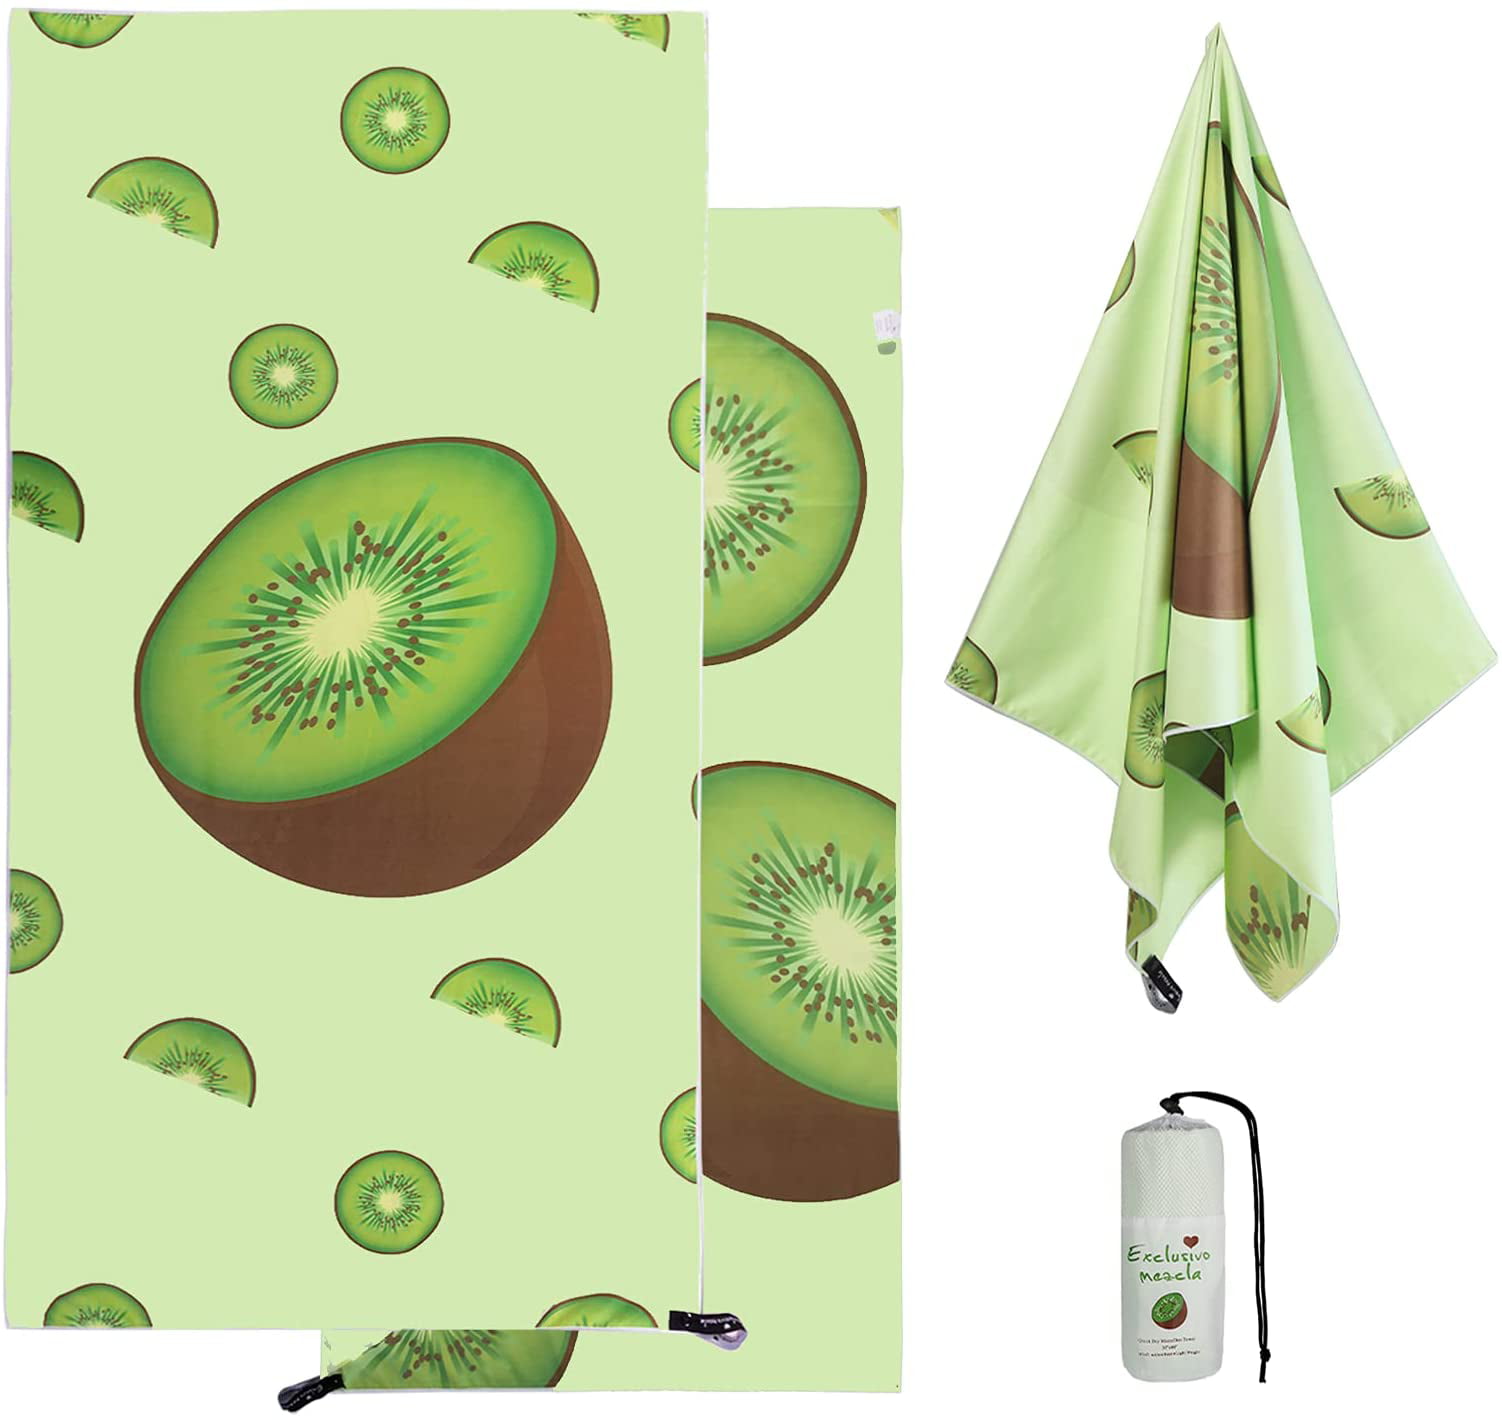 Reversible Fruits Sports/Pool Towel - Large Sand Free and Quick Dry Strawberry and Avocado, 30 x 60 Exclusivo Mezcla 2 Pack Microfiber Beach Towels Set for Kids and Adults